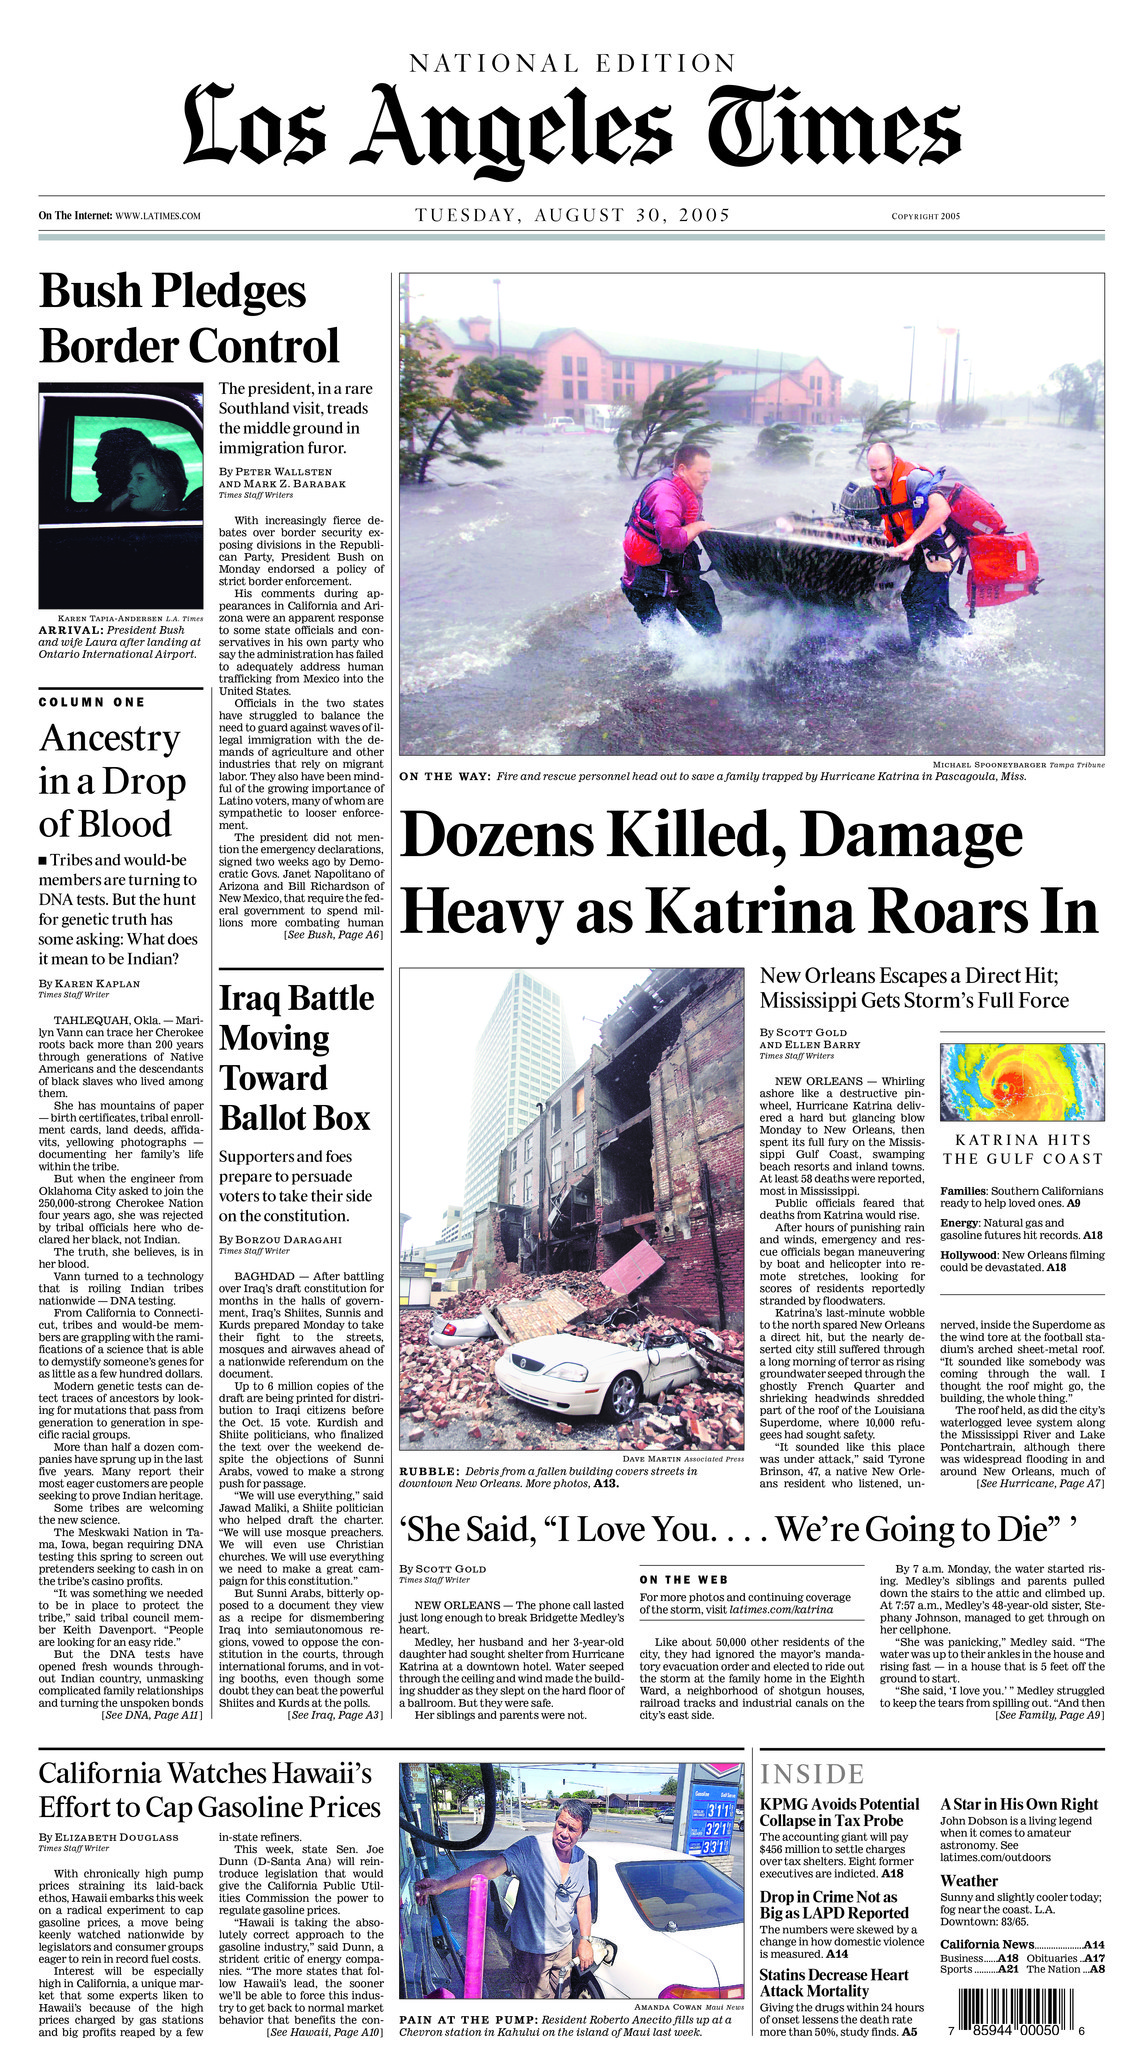 This Day in History: In 2005, Hurricane Katrina ravaged New Orleans